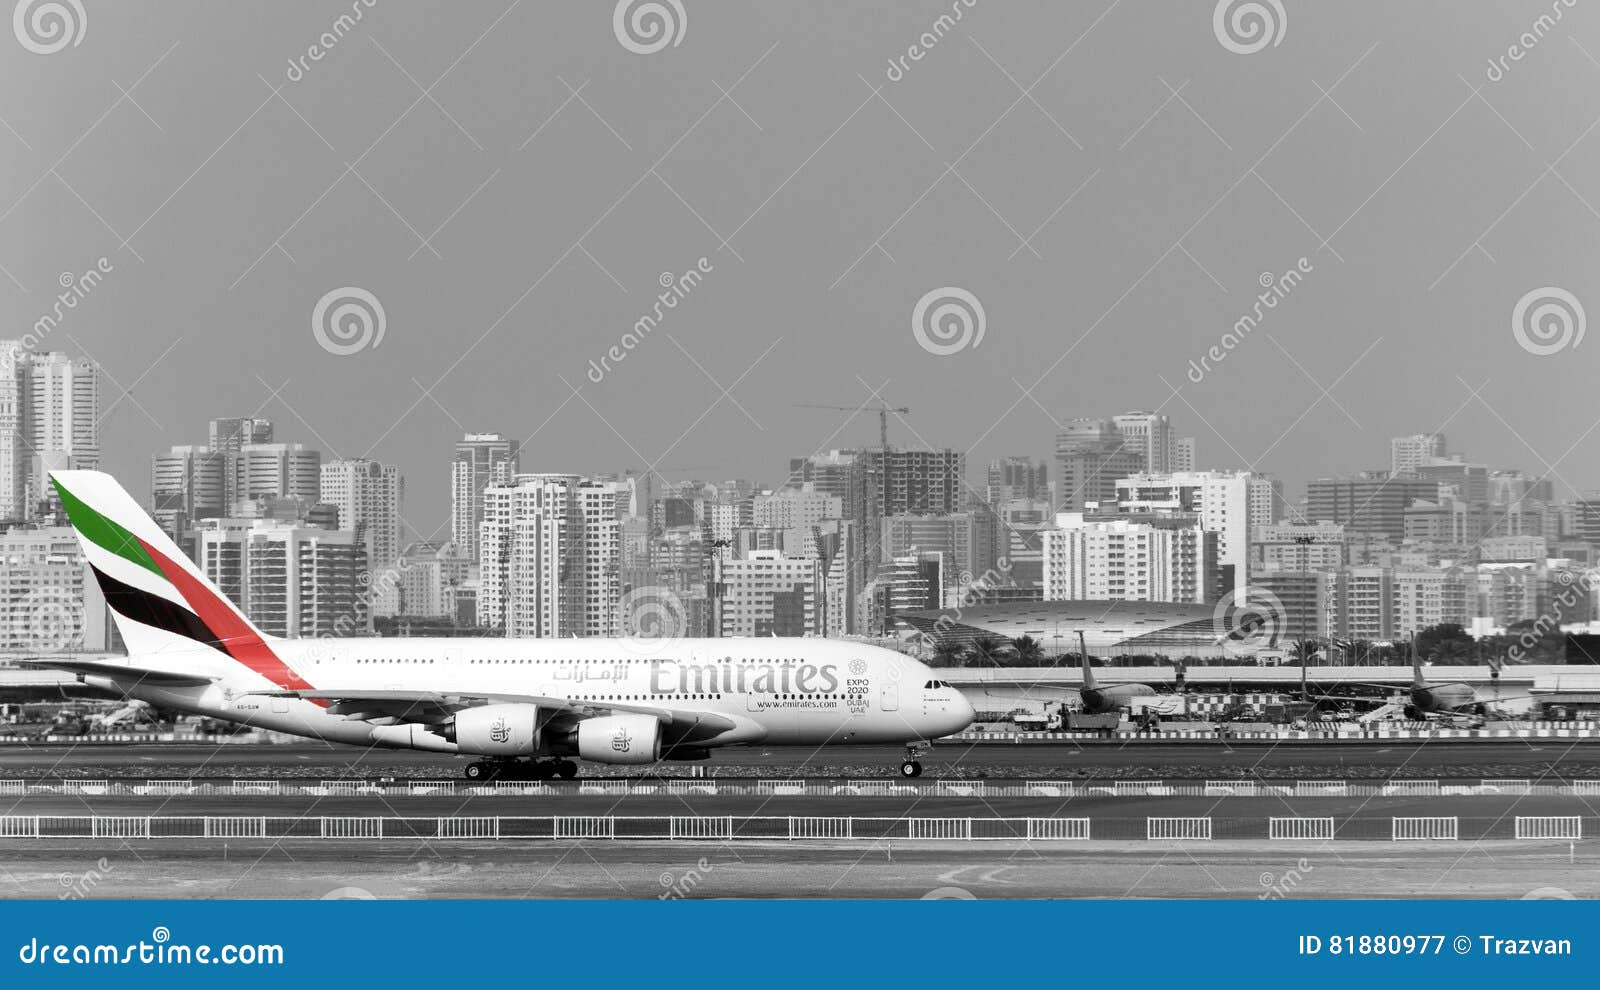 Airbus A380 Of The Emirates Airlines Editorial Photo